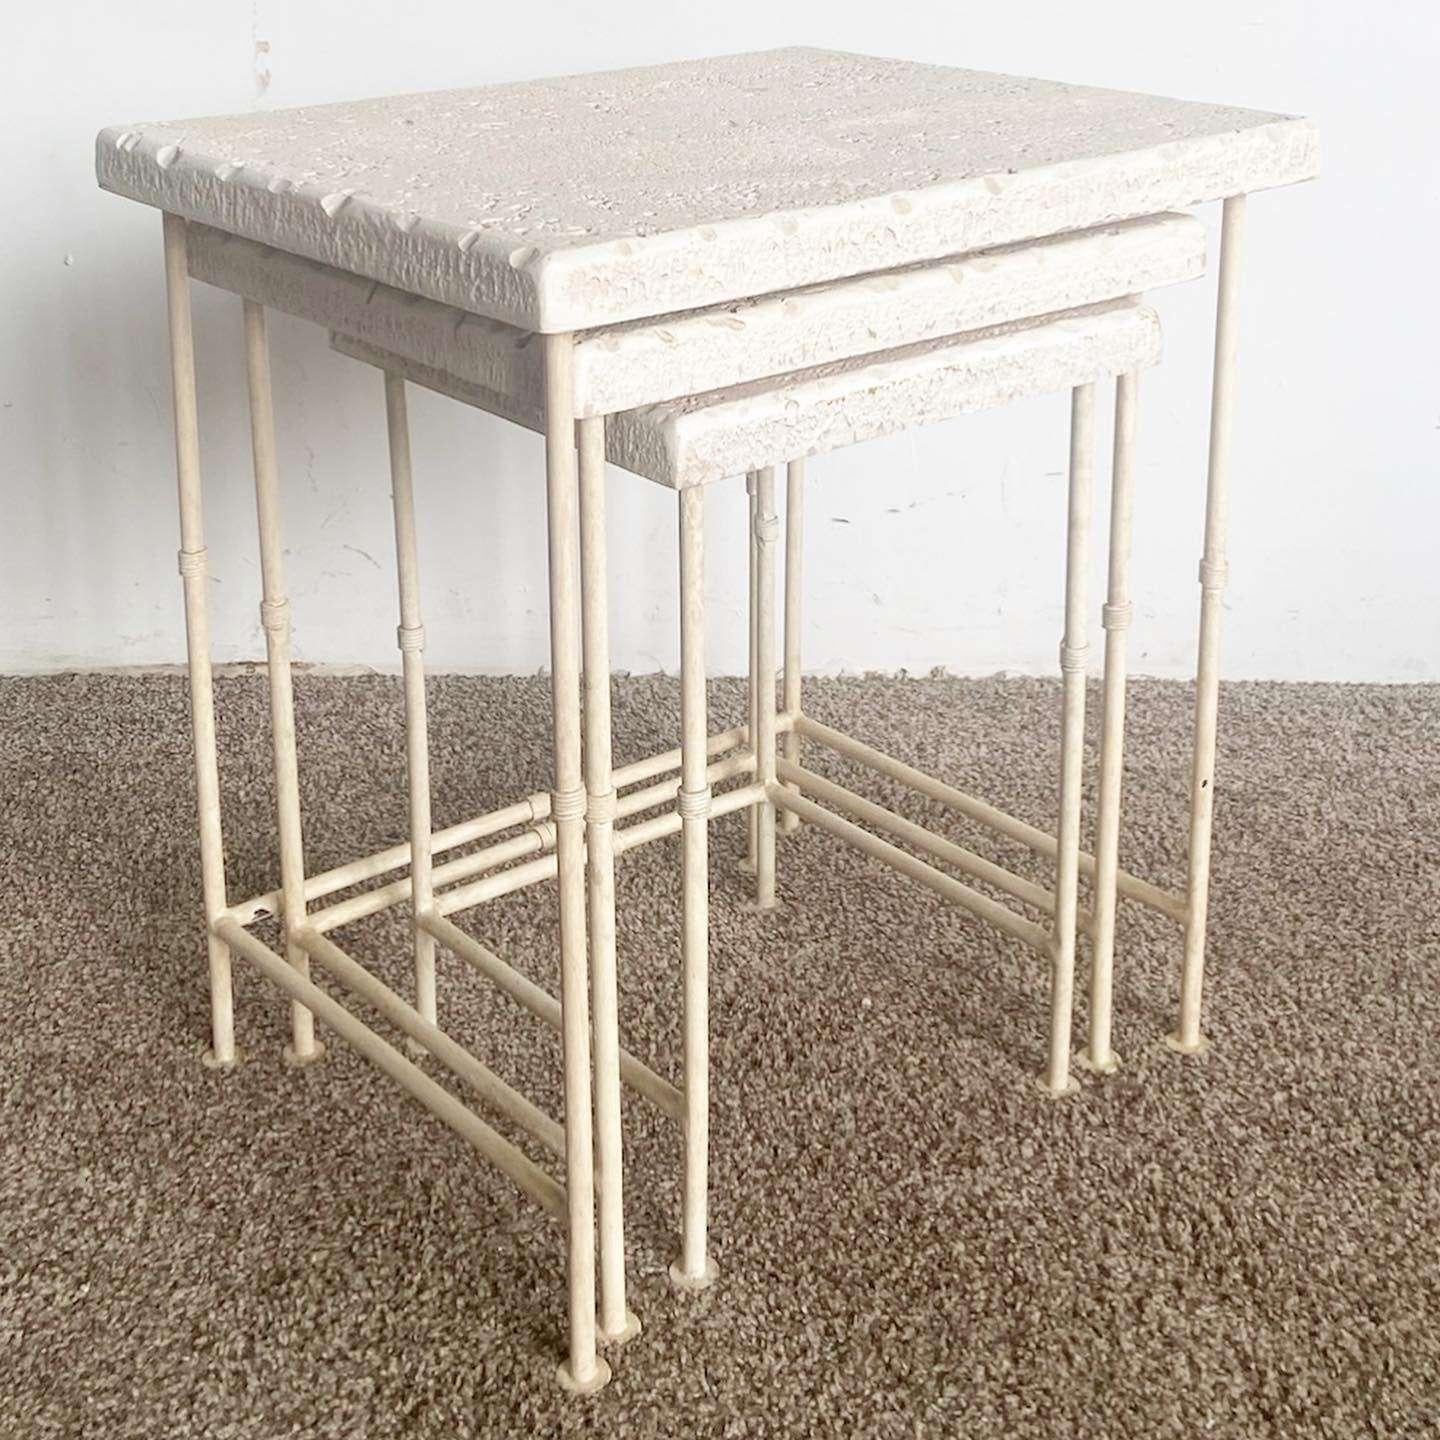 Exceptional vintage postmodern set of 3 rectangular nesting tables. Each feature a faux coral top with metal faux bamboo legs.

Medium table measures 18”W, 16”D, 22”H
Smallest table measures 14”W, 20.5”H